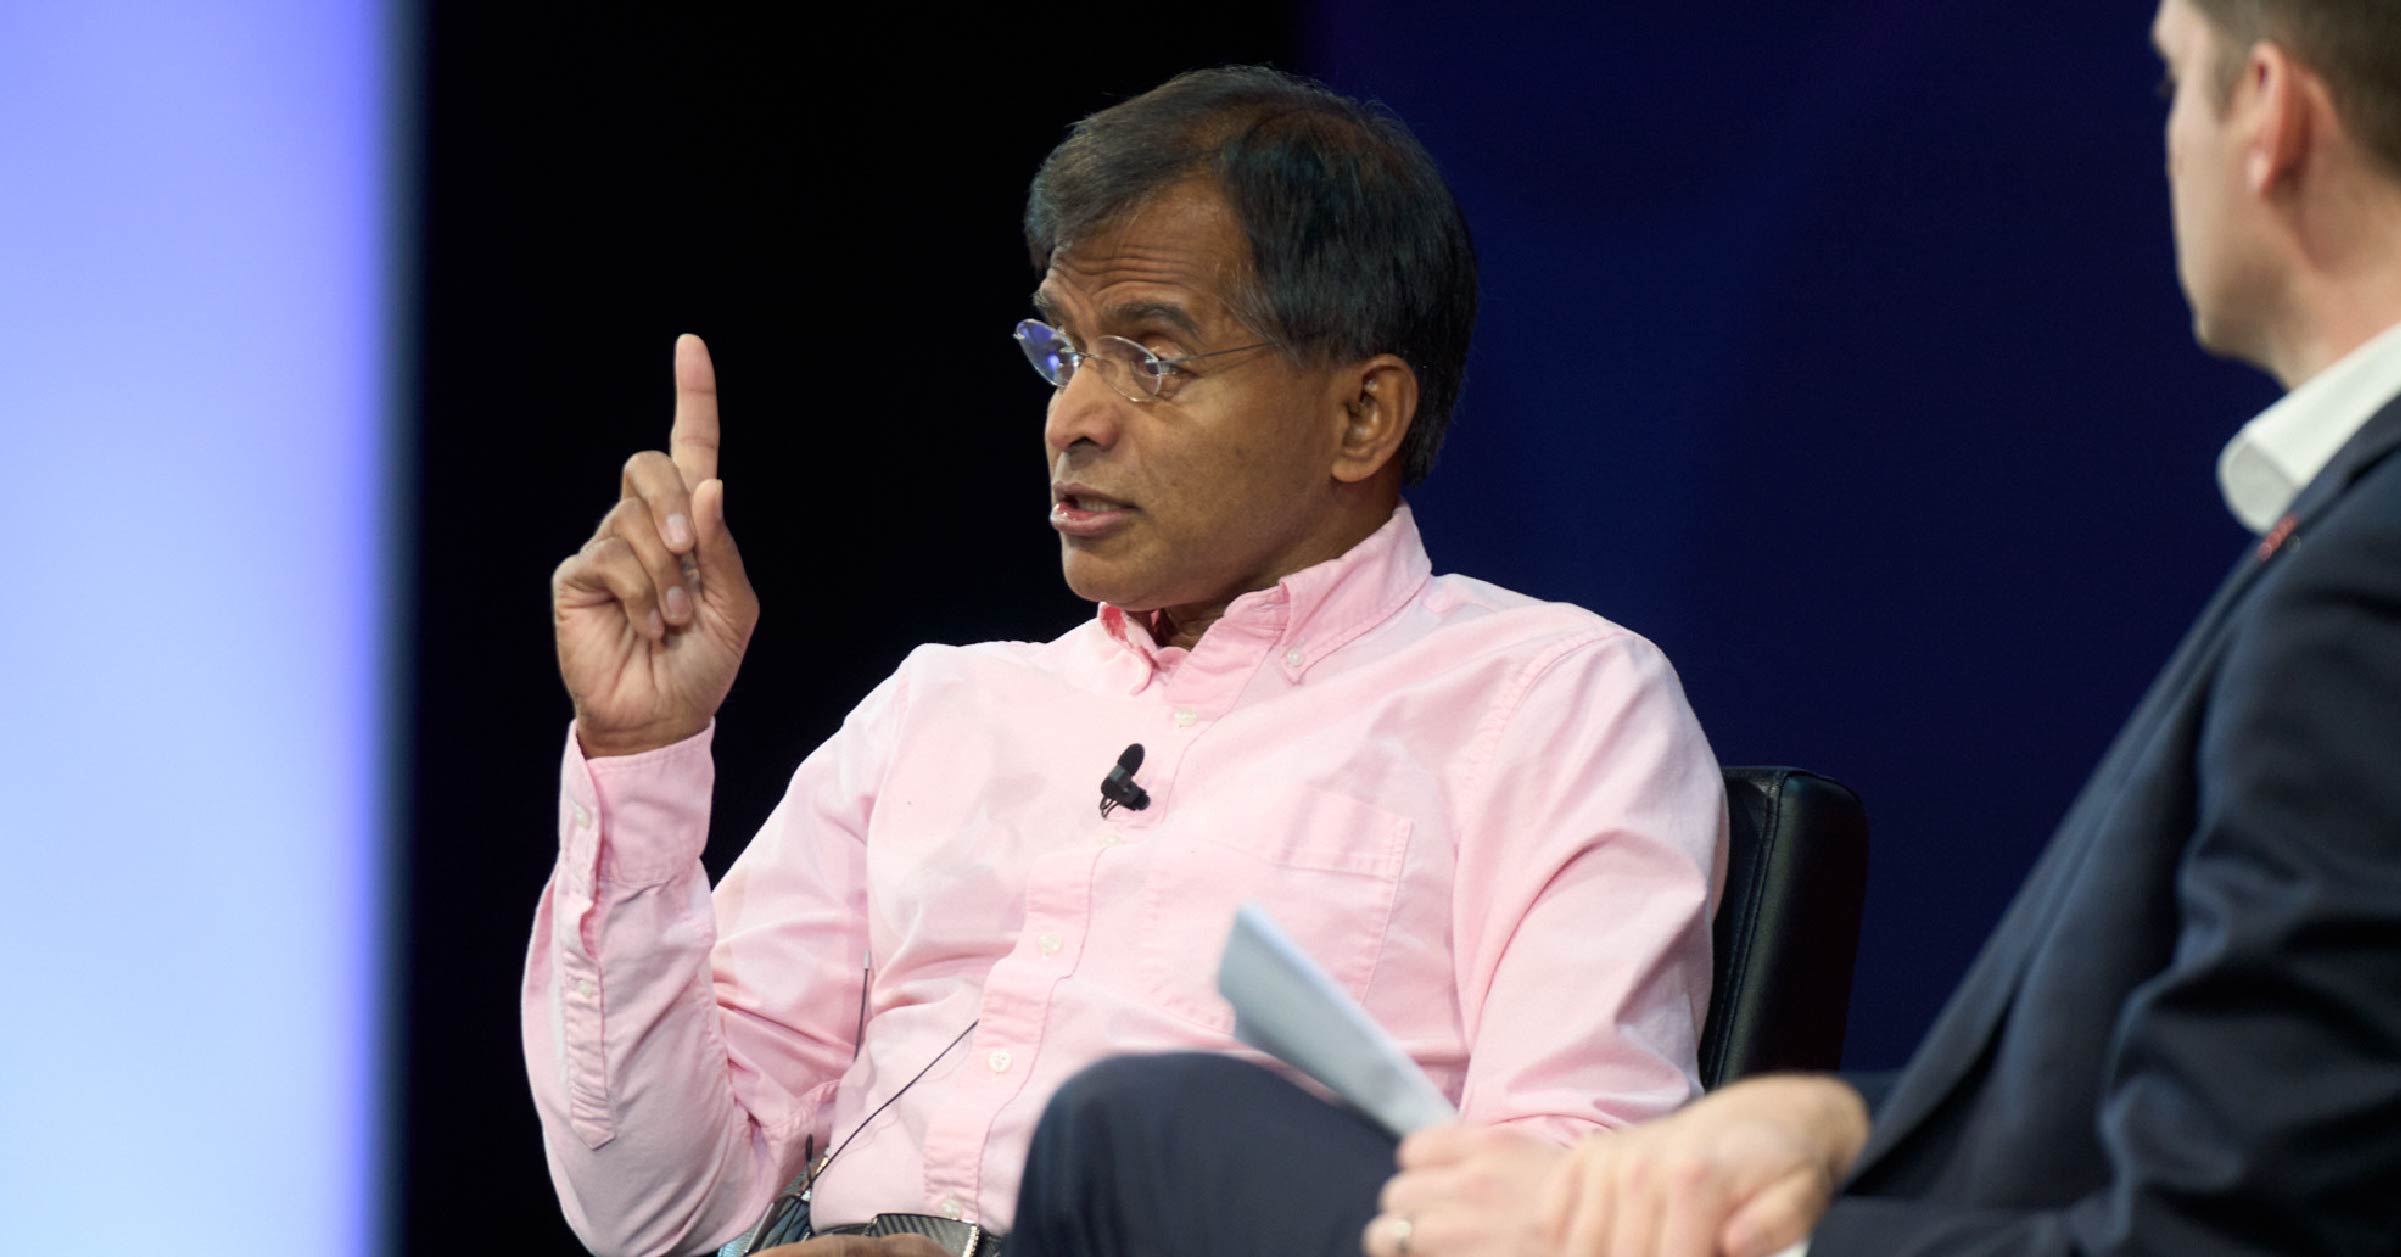 Aswath Damodaran and Adam Fleck on stage at the 2023 Morningstar Investment Conference.